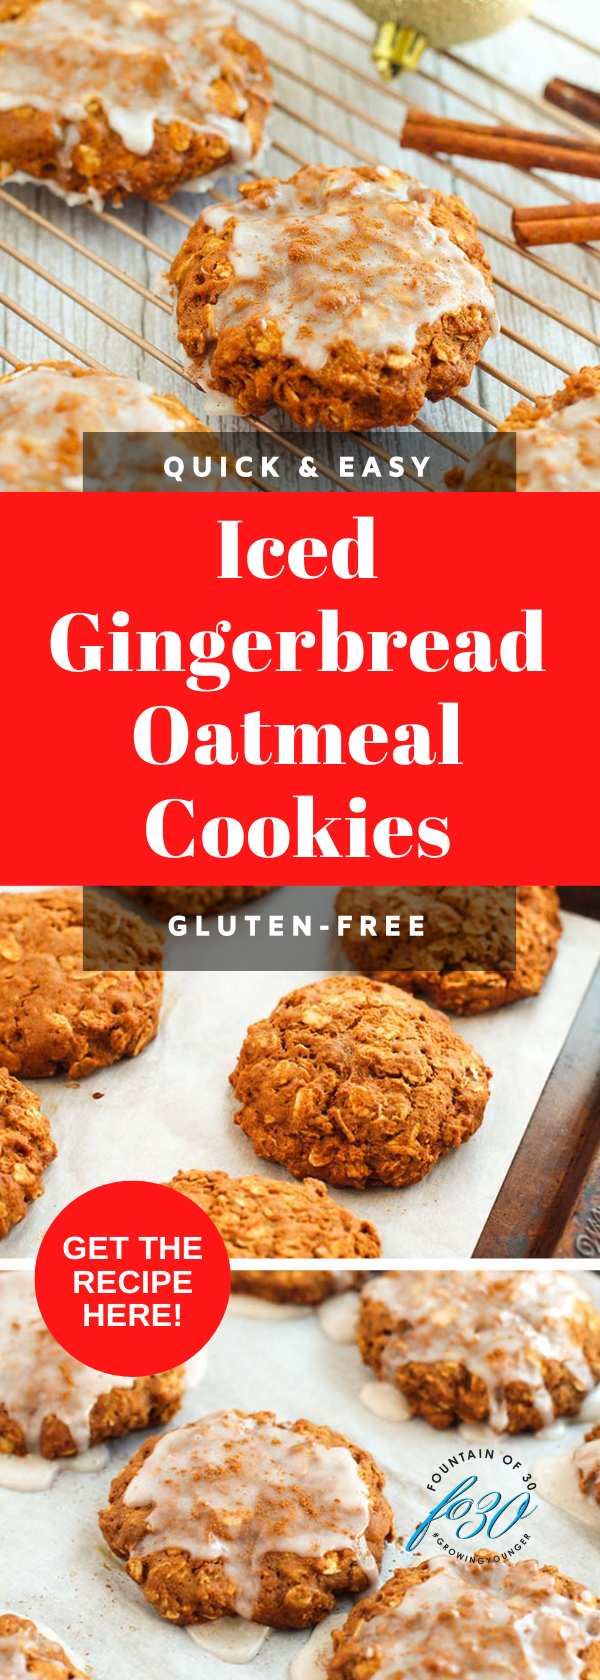 Quick and Easy Iced Gingerbread Oatmeal Cookies fountainof30